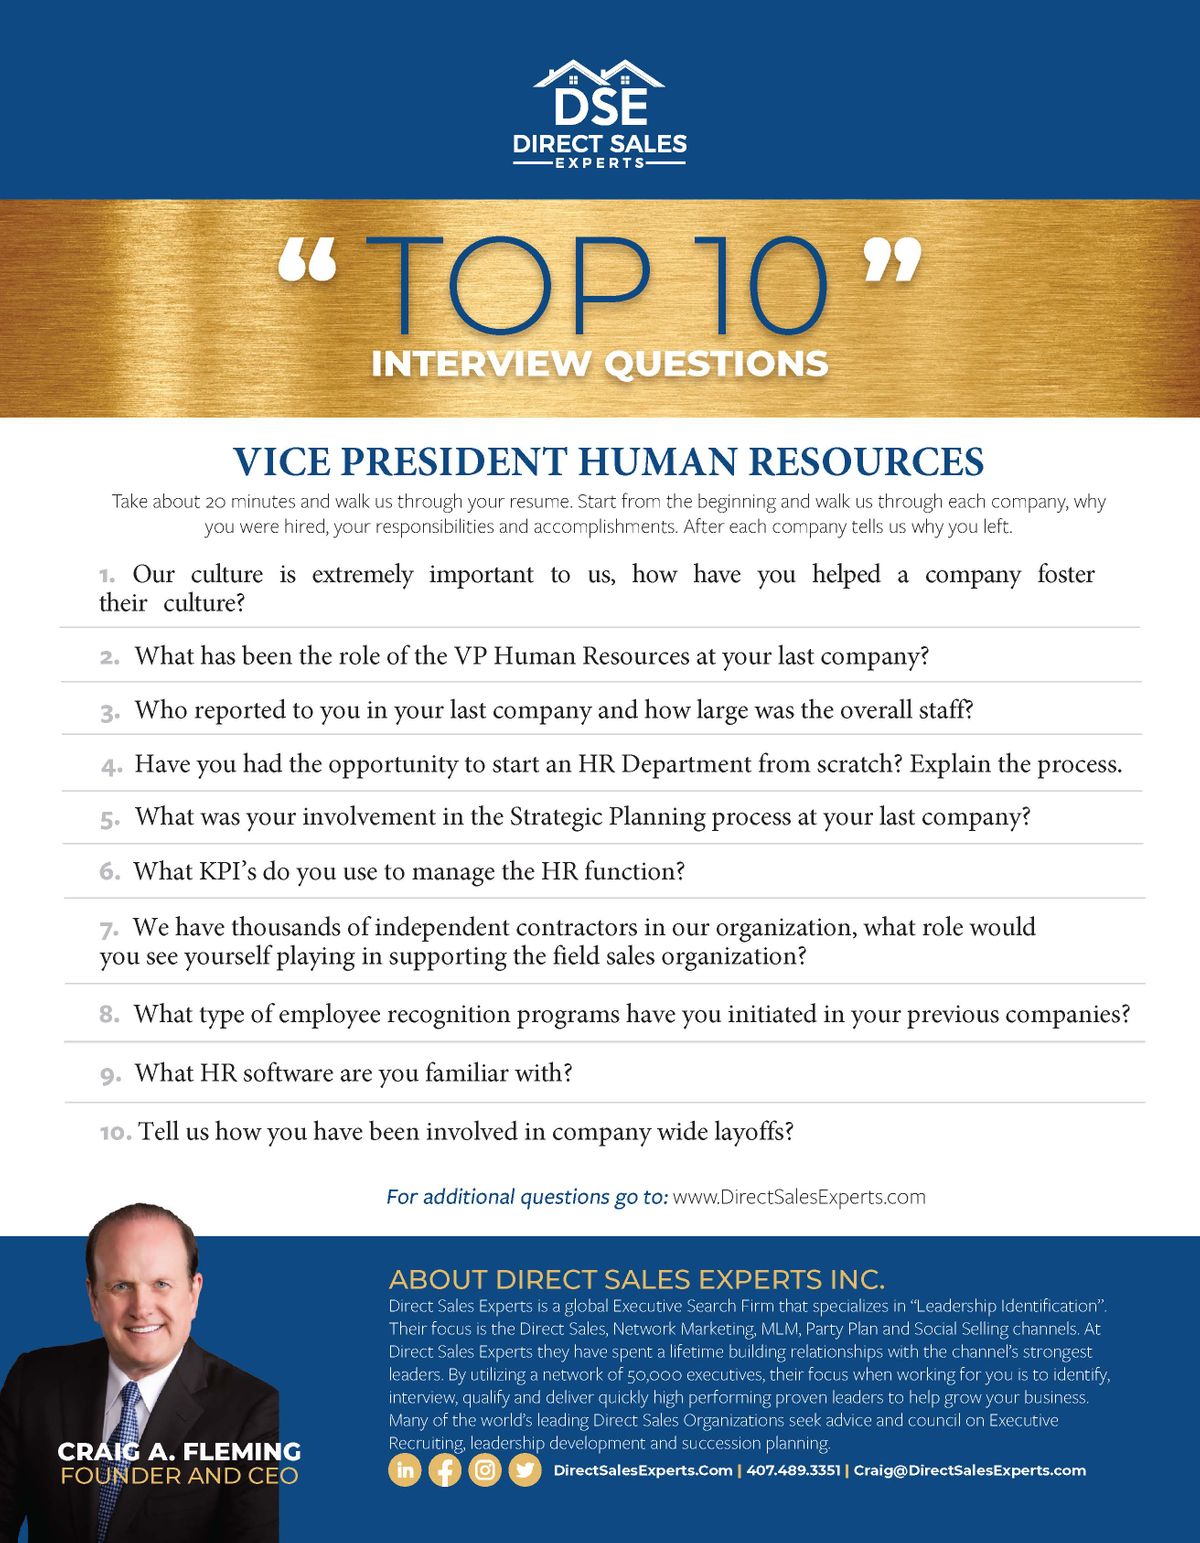 DirectSalesExperts_Top10-VPHumanResources.-Jpeg_Page_1.jpg